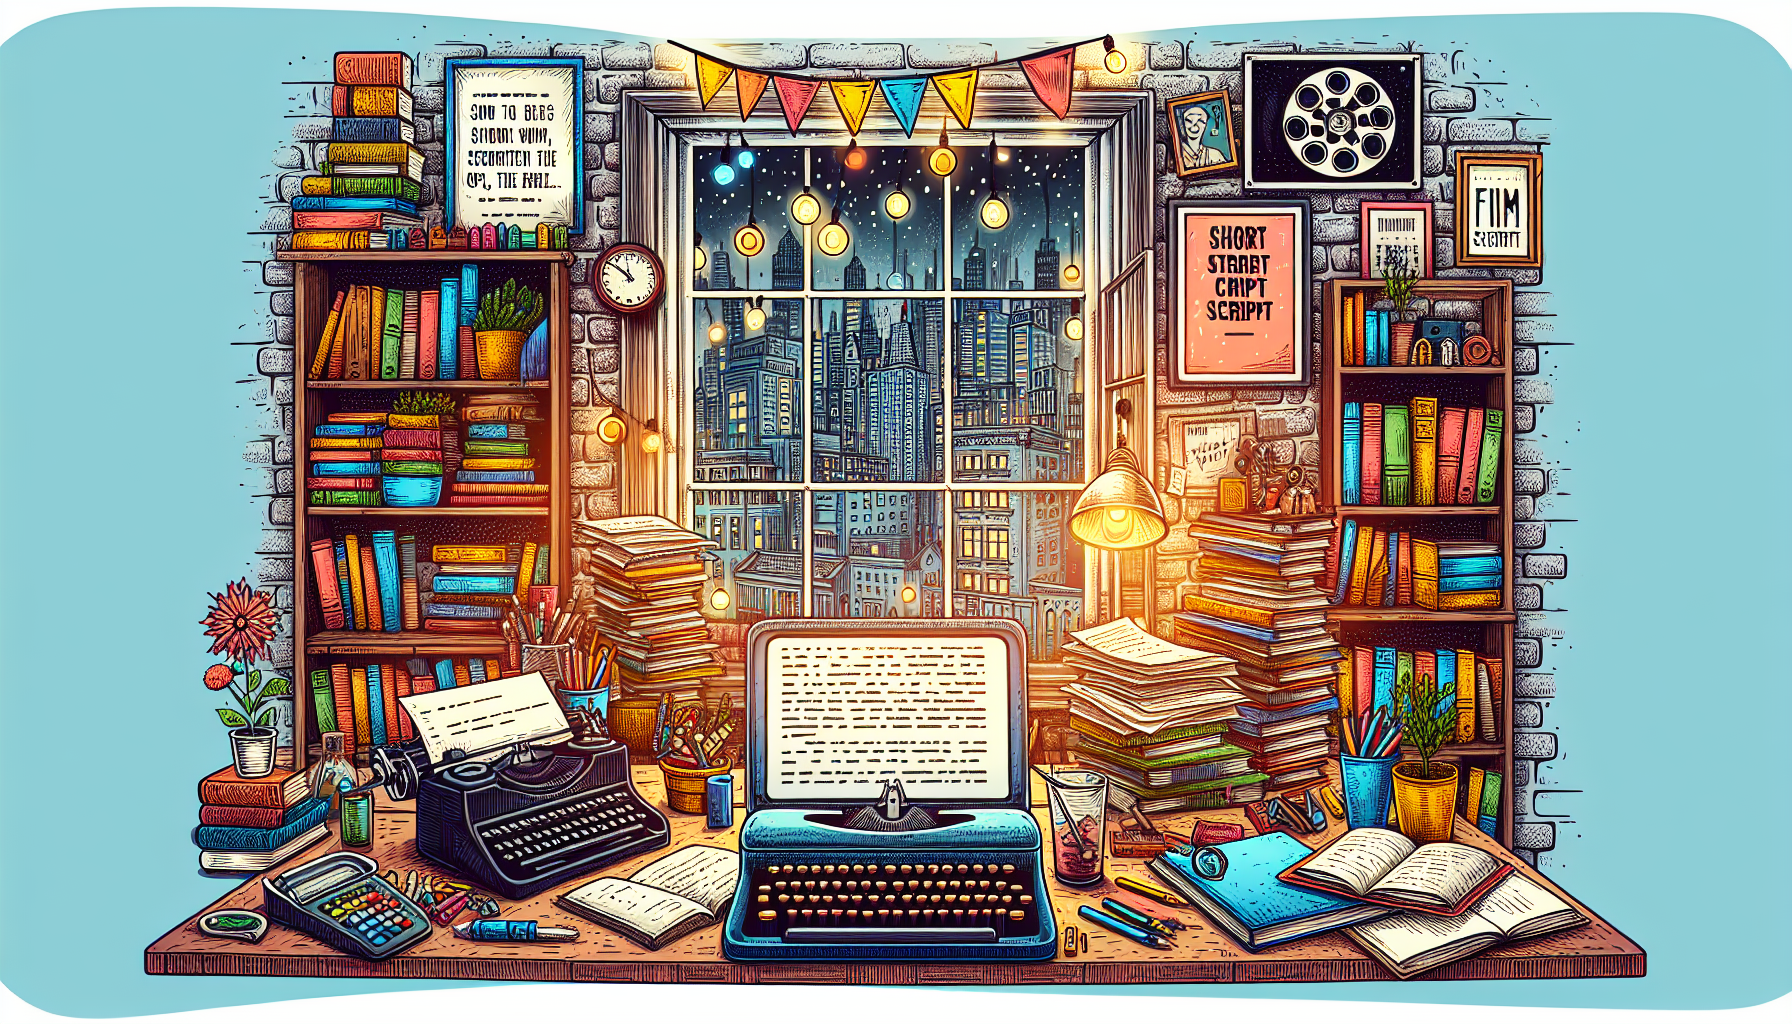 A whimsical writer's workspace filled with stacks of screenplays, a vintage typewriter, overflowing bookshelves, an open laptop displaying a scriptwriting software, inspirational film posters on the w